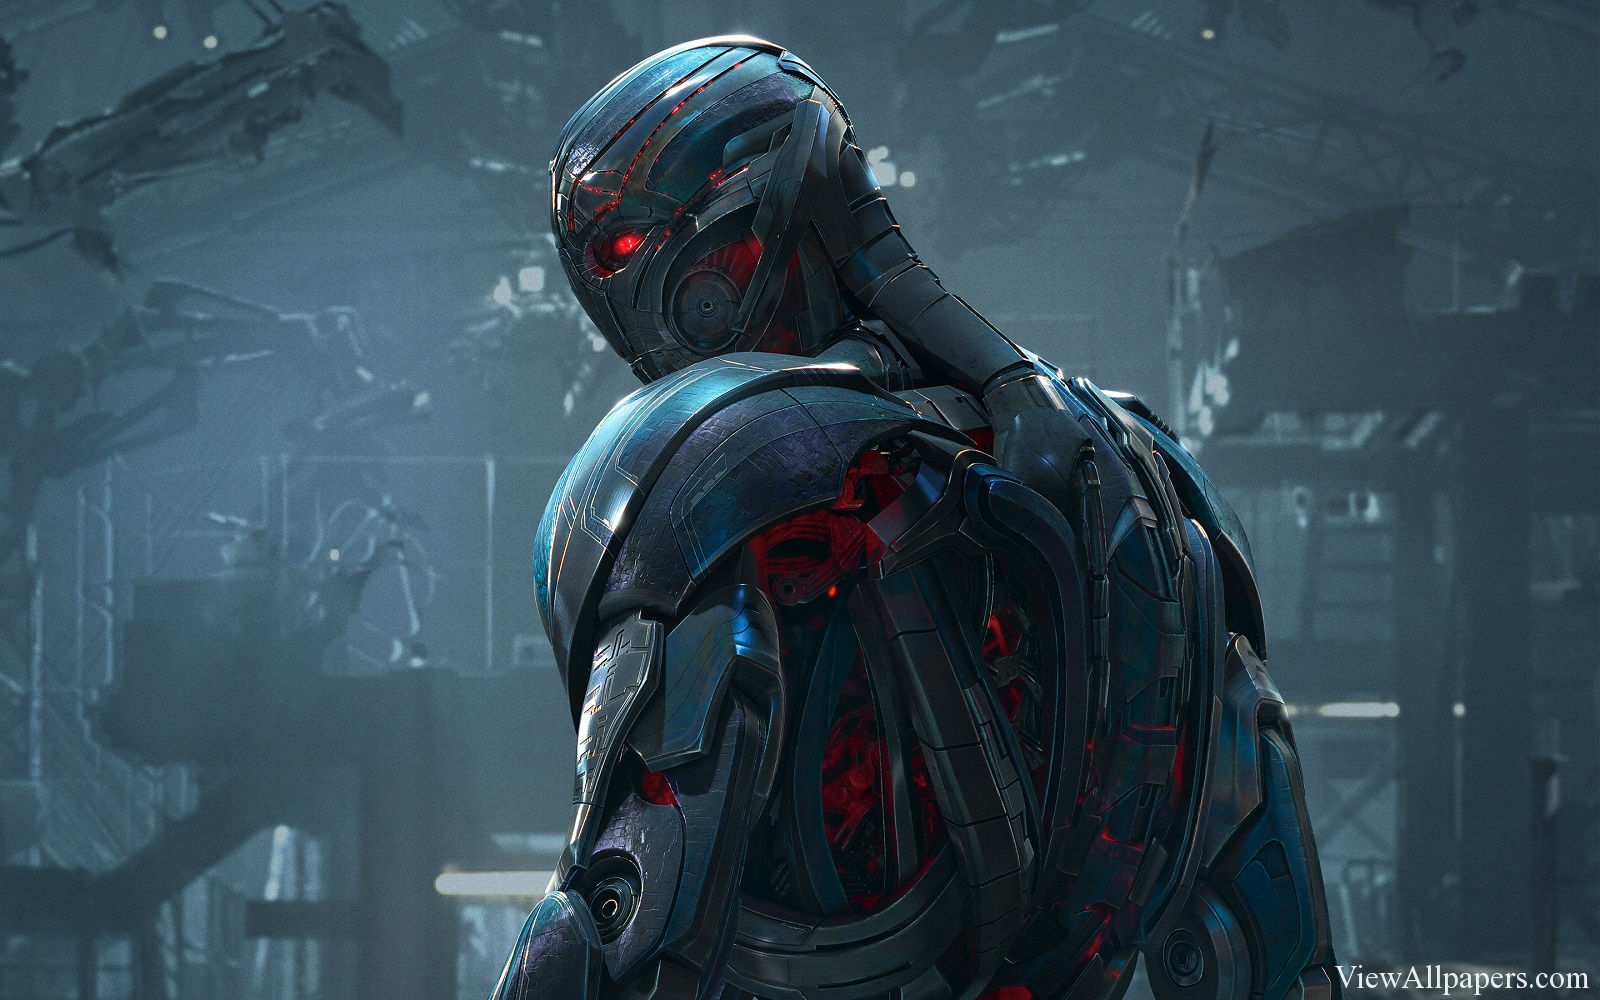 Age Of Ultron High Resolution Wallpaper Free download Avengers Age